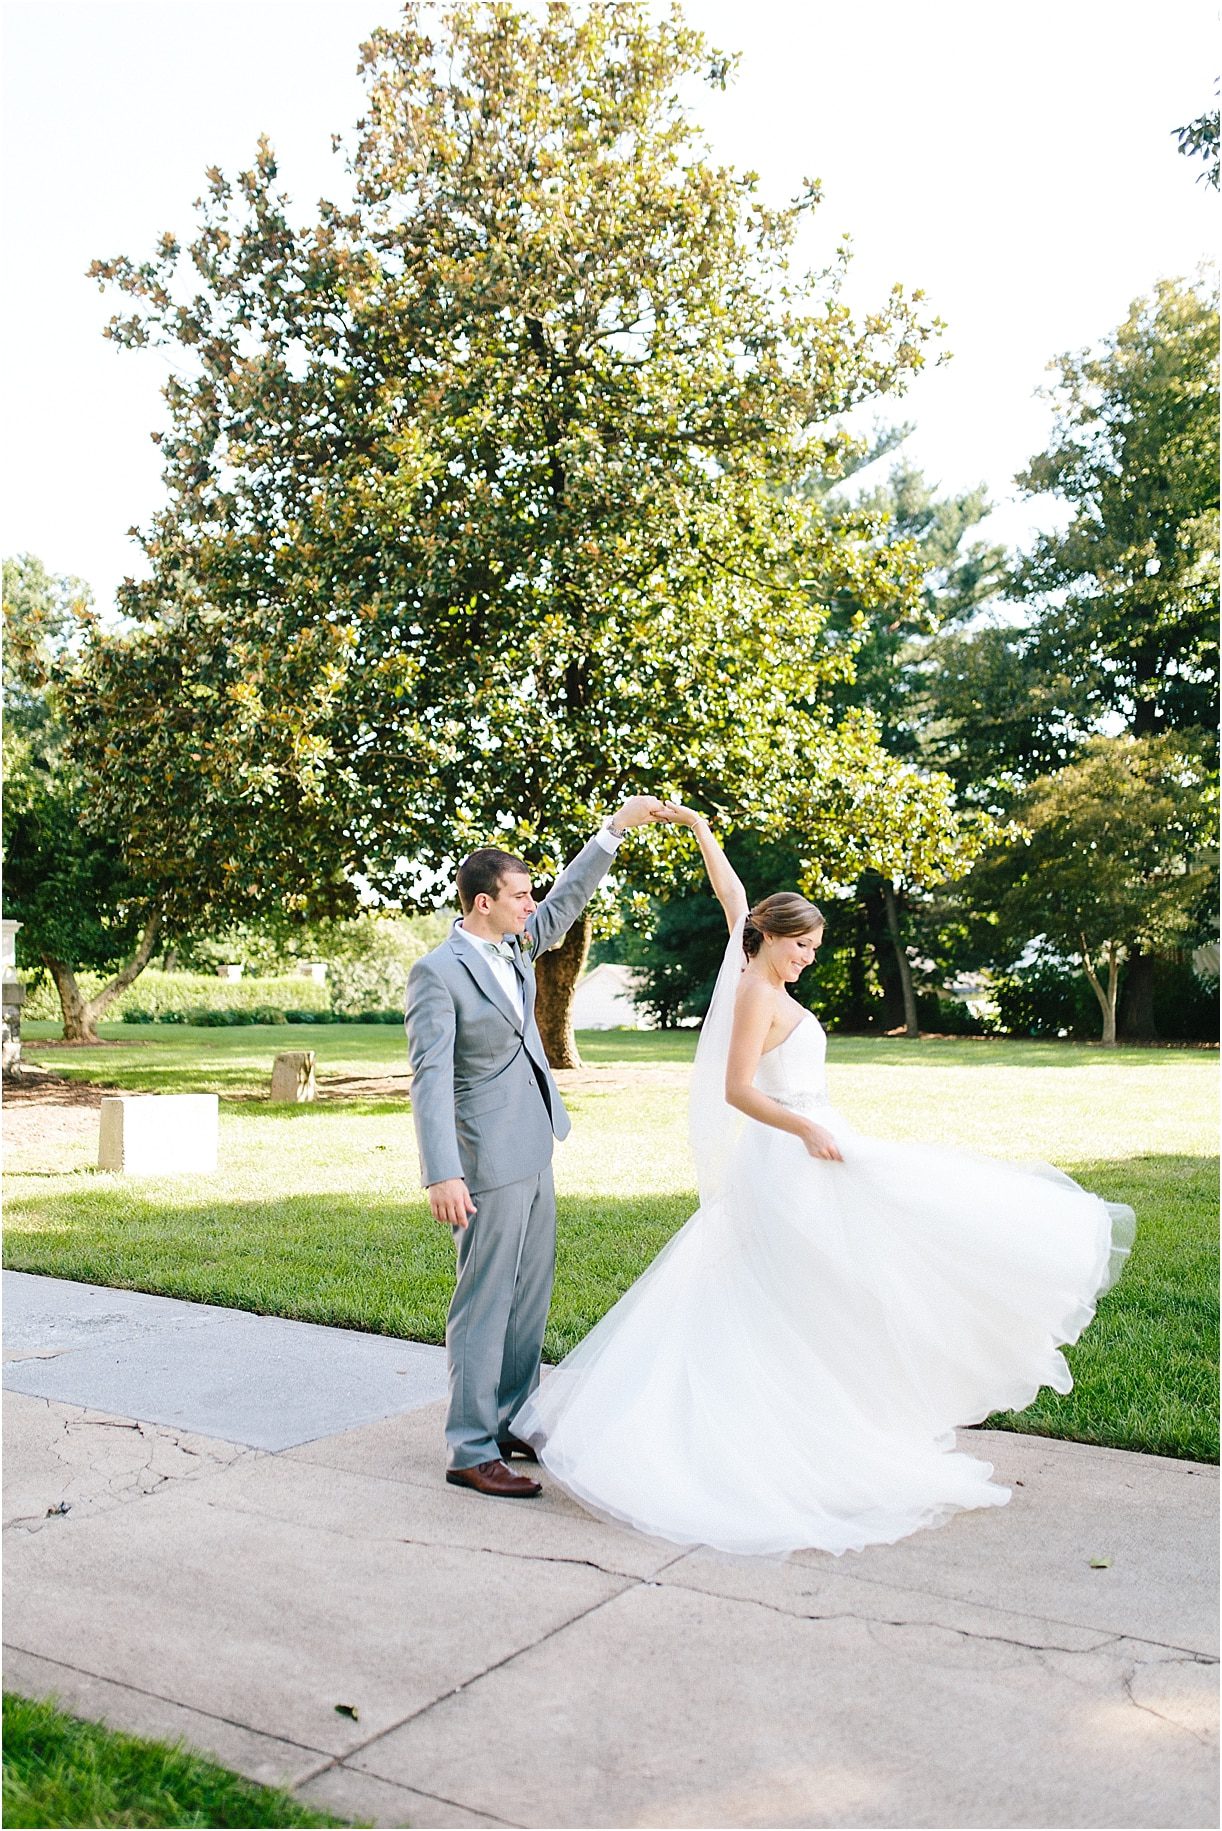 A Pink and Aqua Roanoke Virginia Wedding as seen on Hill City Bride Blog and Magazine - dance